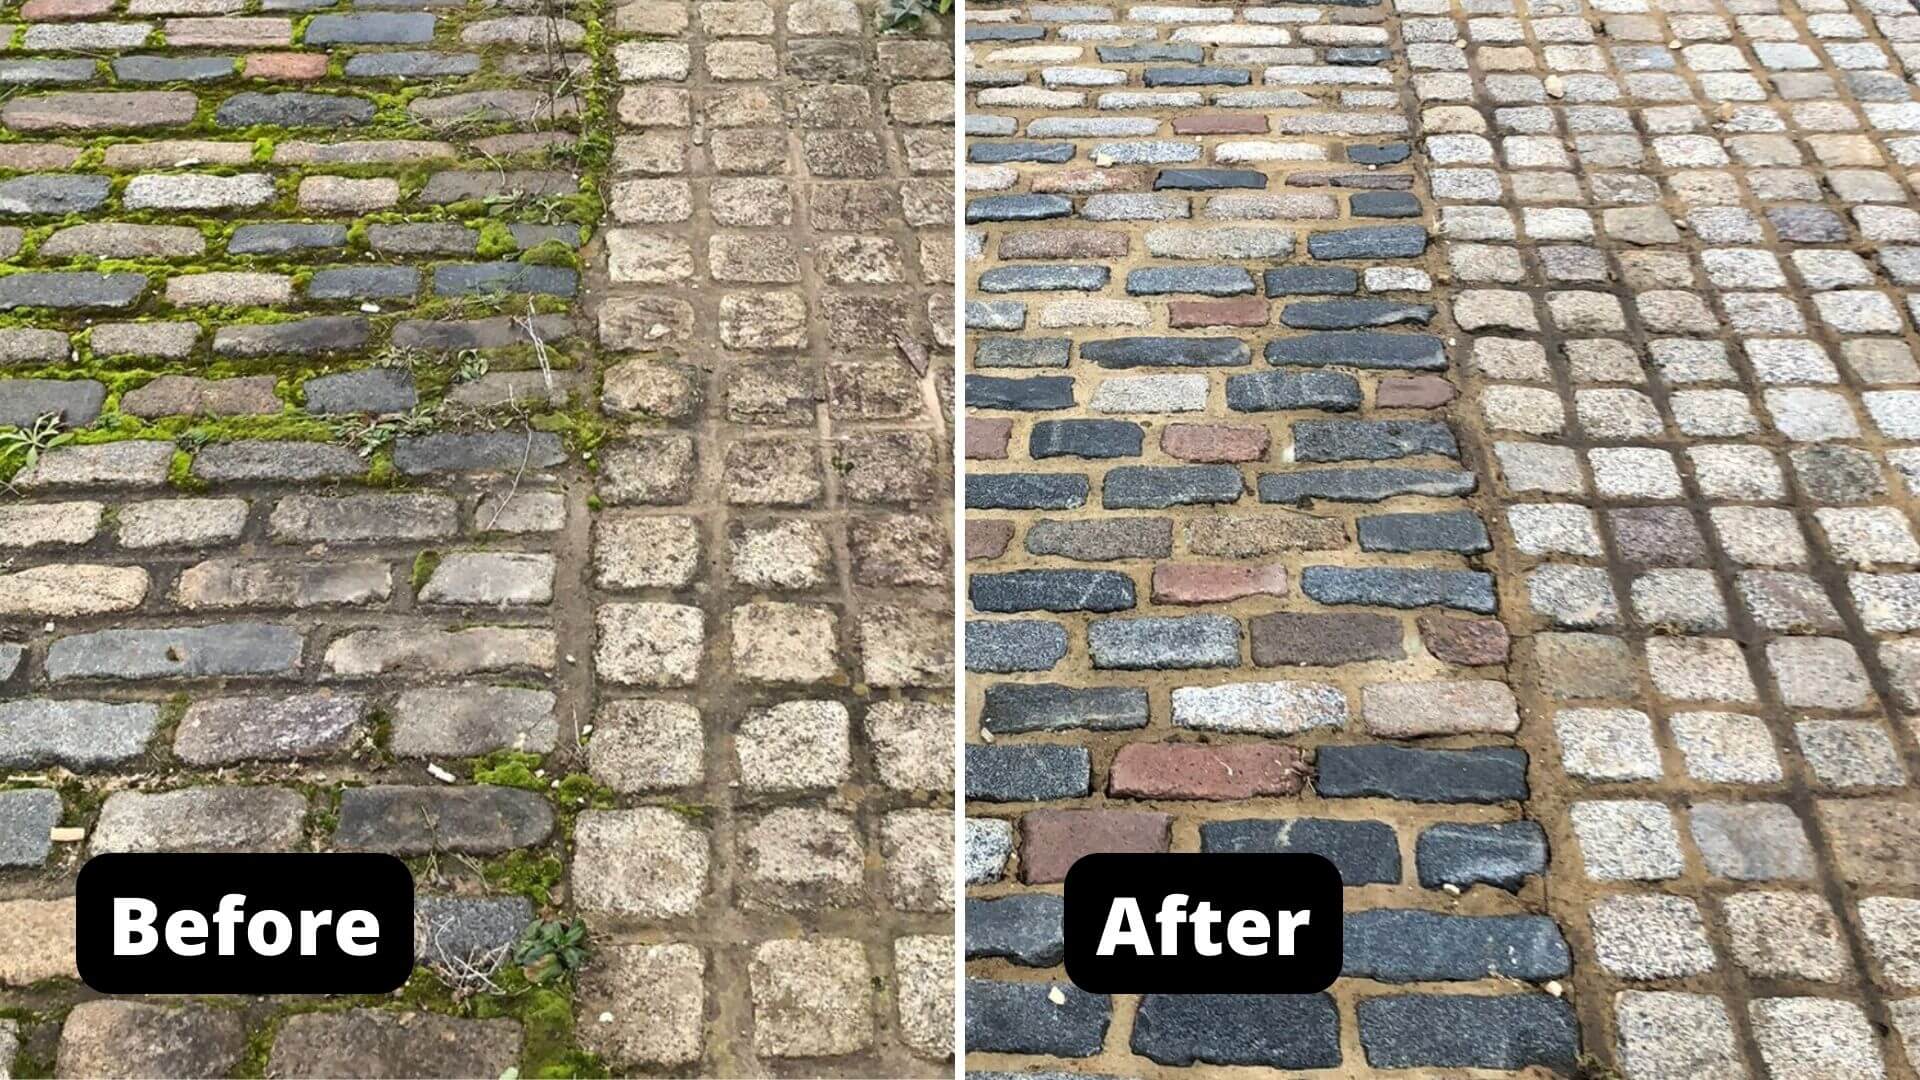 Stone Flooring Cleaning: before and after photos to illustrate Vinci's stone cleaning services.